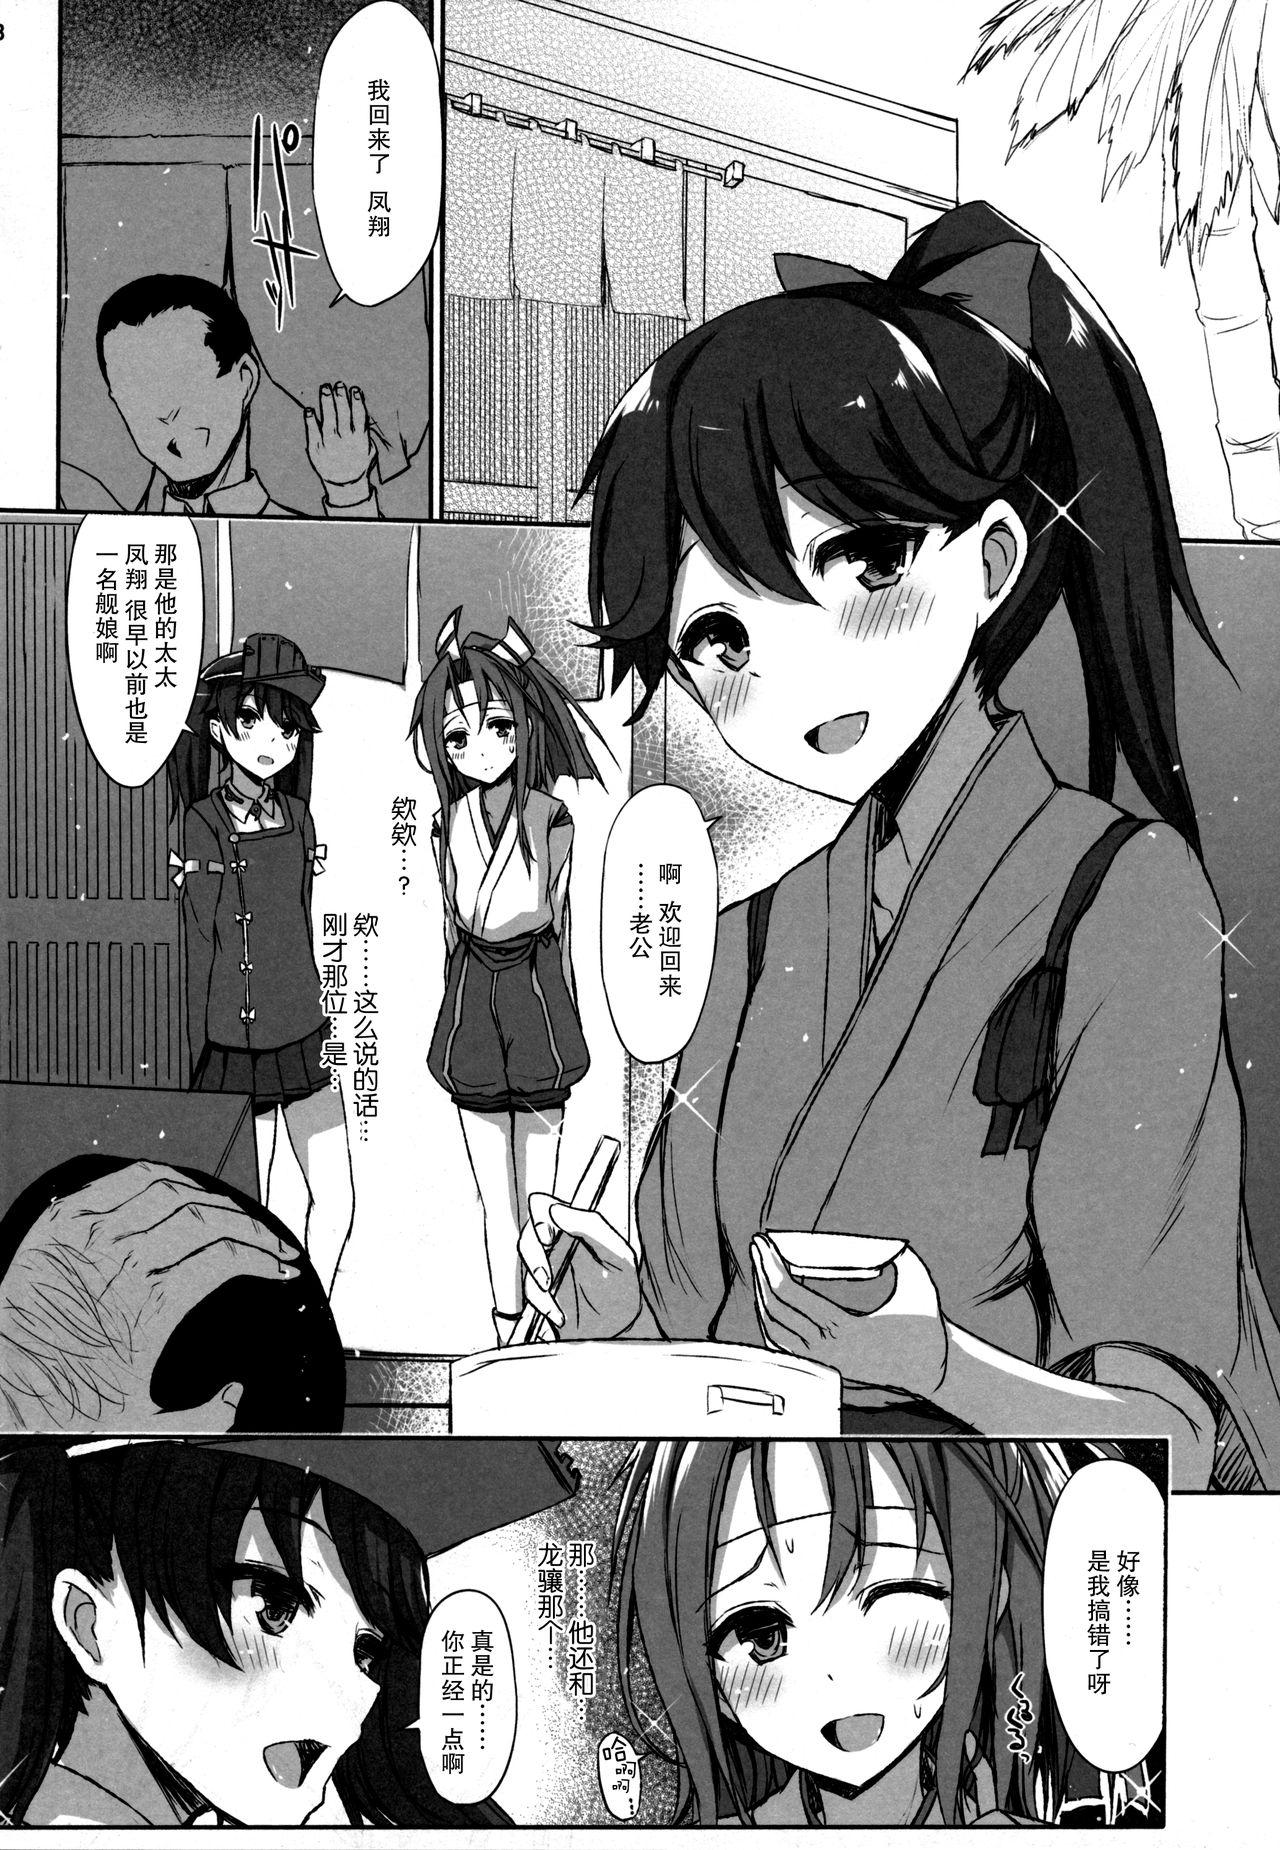 Cdmx AND THEN NOTHING - Kantai collection Free Teenage Porn - Page 8